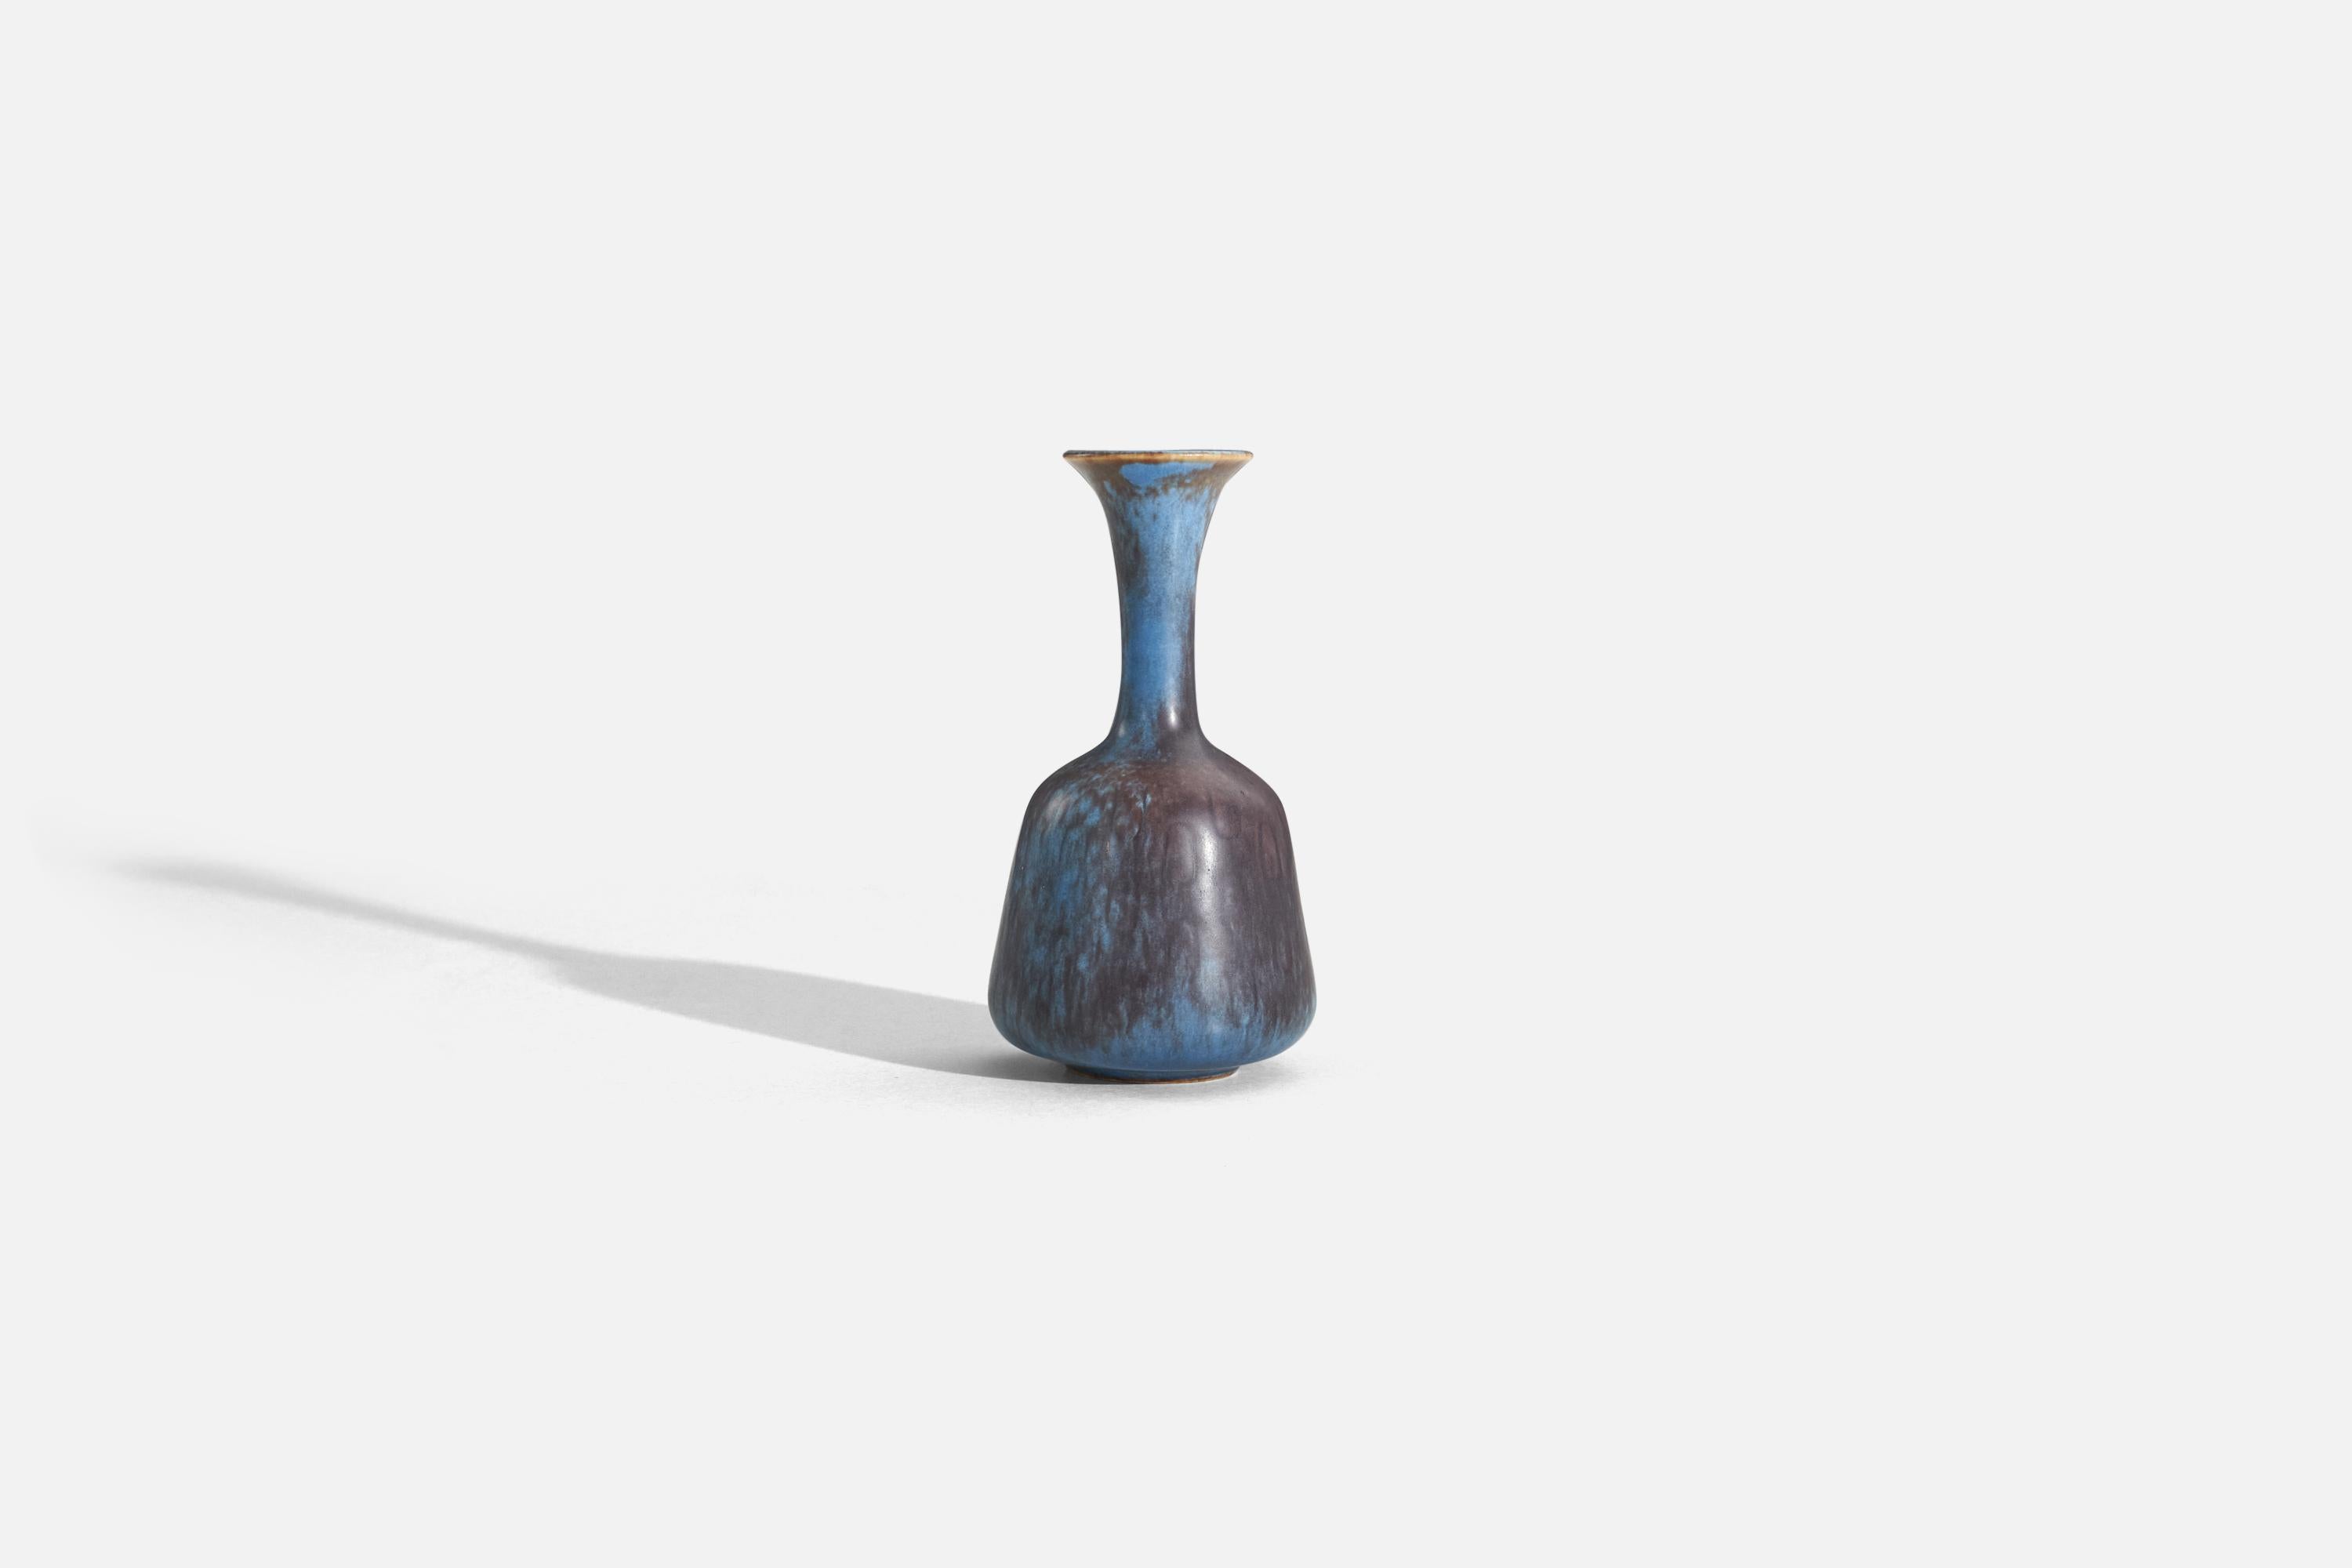 A blue and brown-glazed stoneware vase designed by Gunnar Nylund and produced by Rörstrand, Sweden, 1950s.